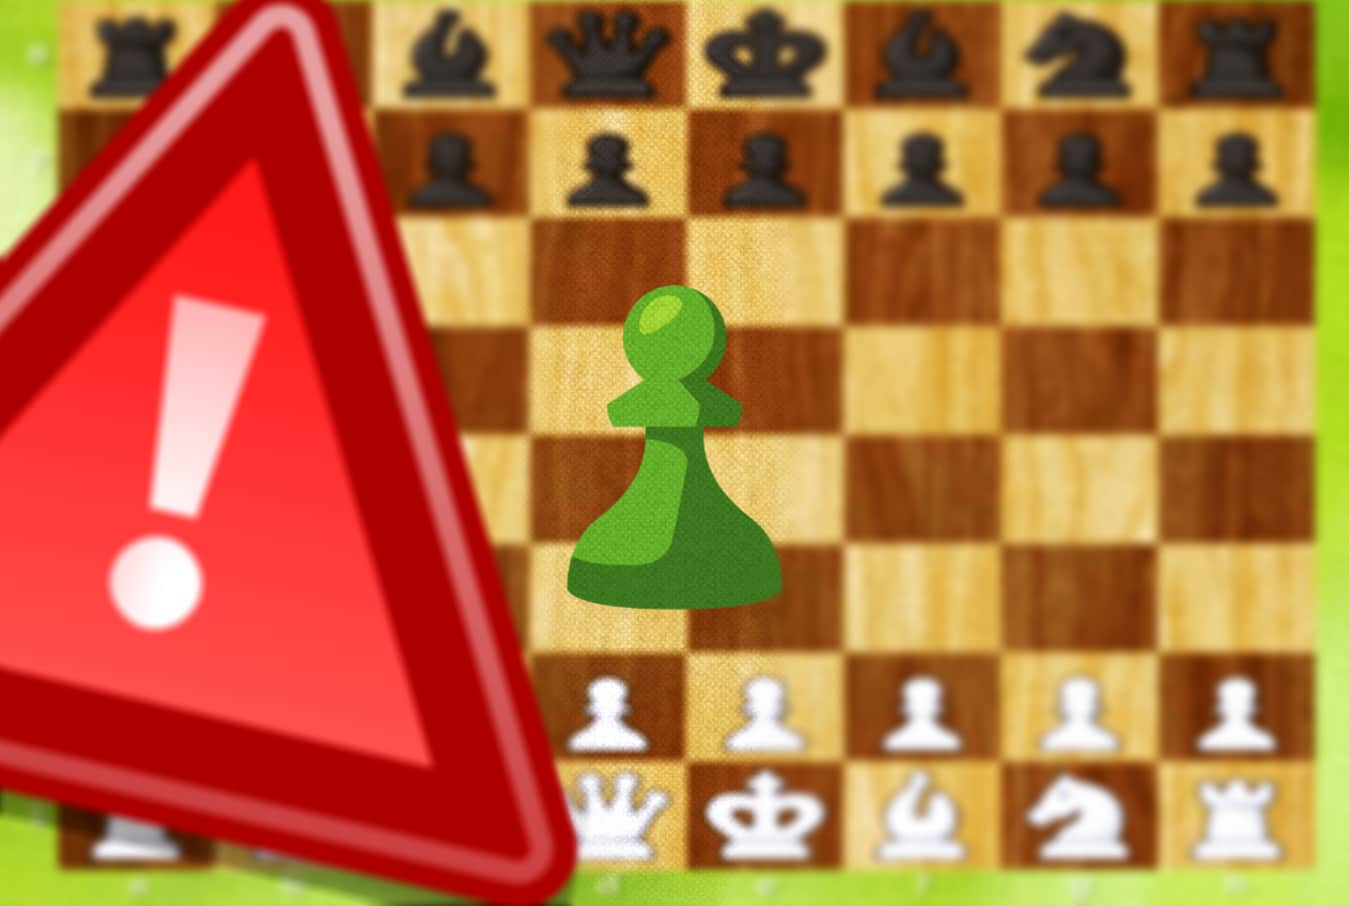 API Bug Found in Chess.com- 50 Million Customer Records Accessed